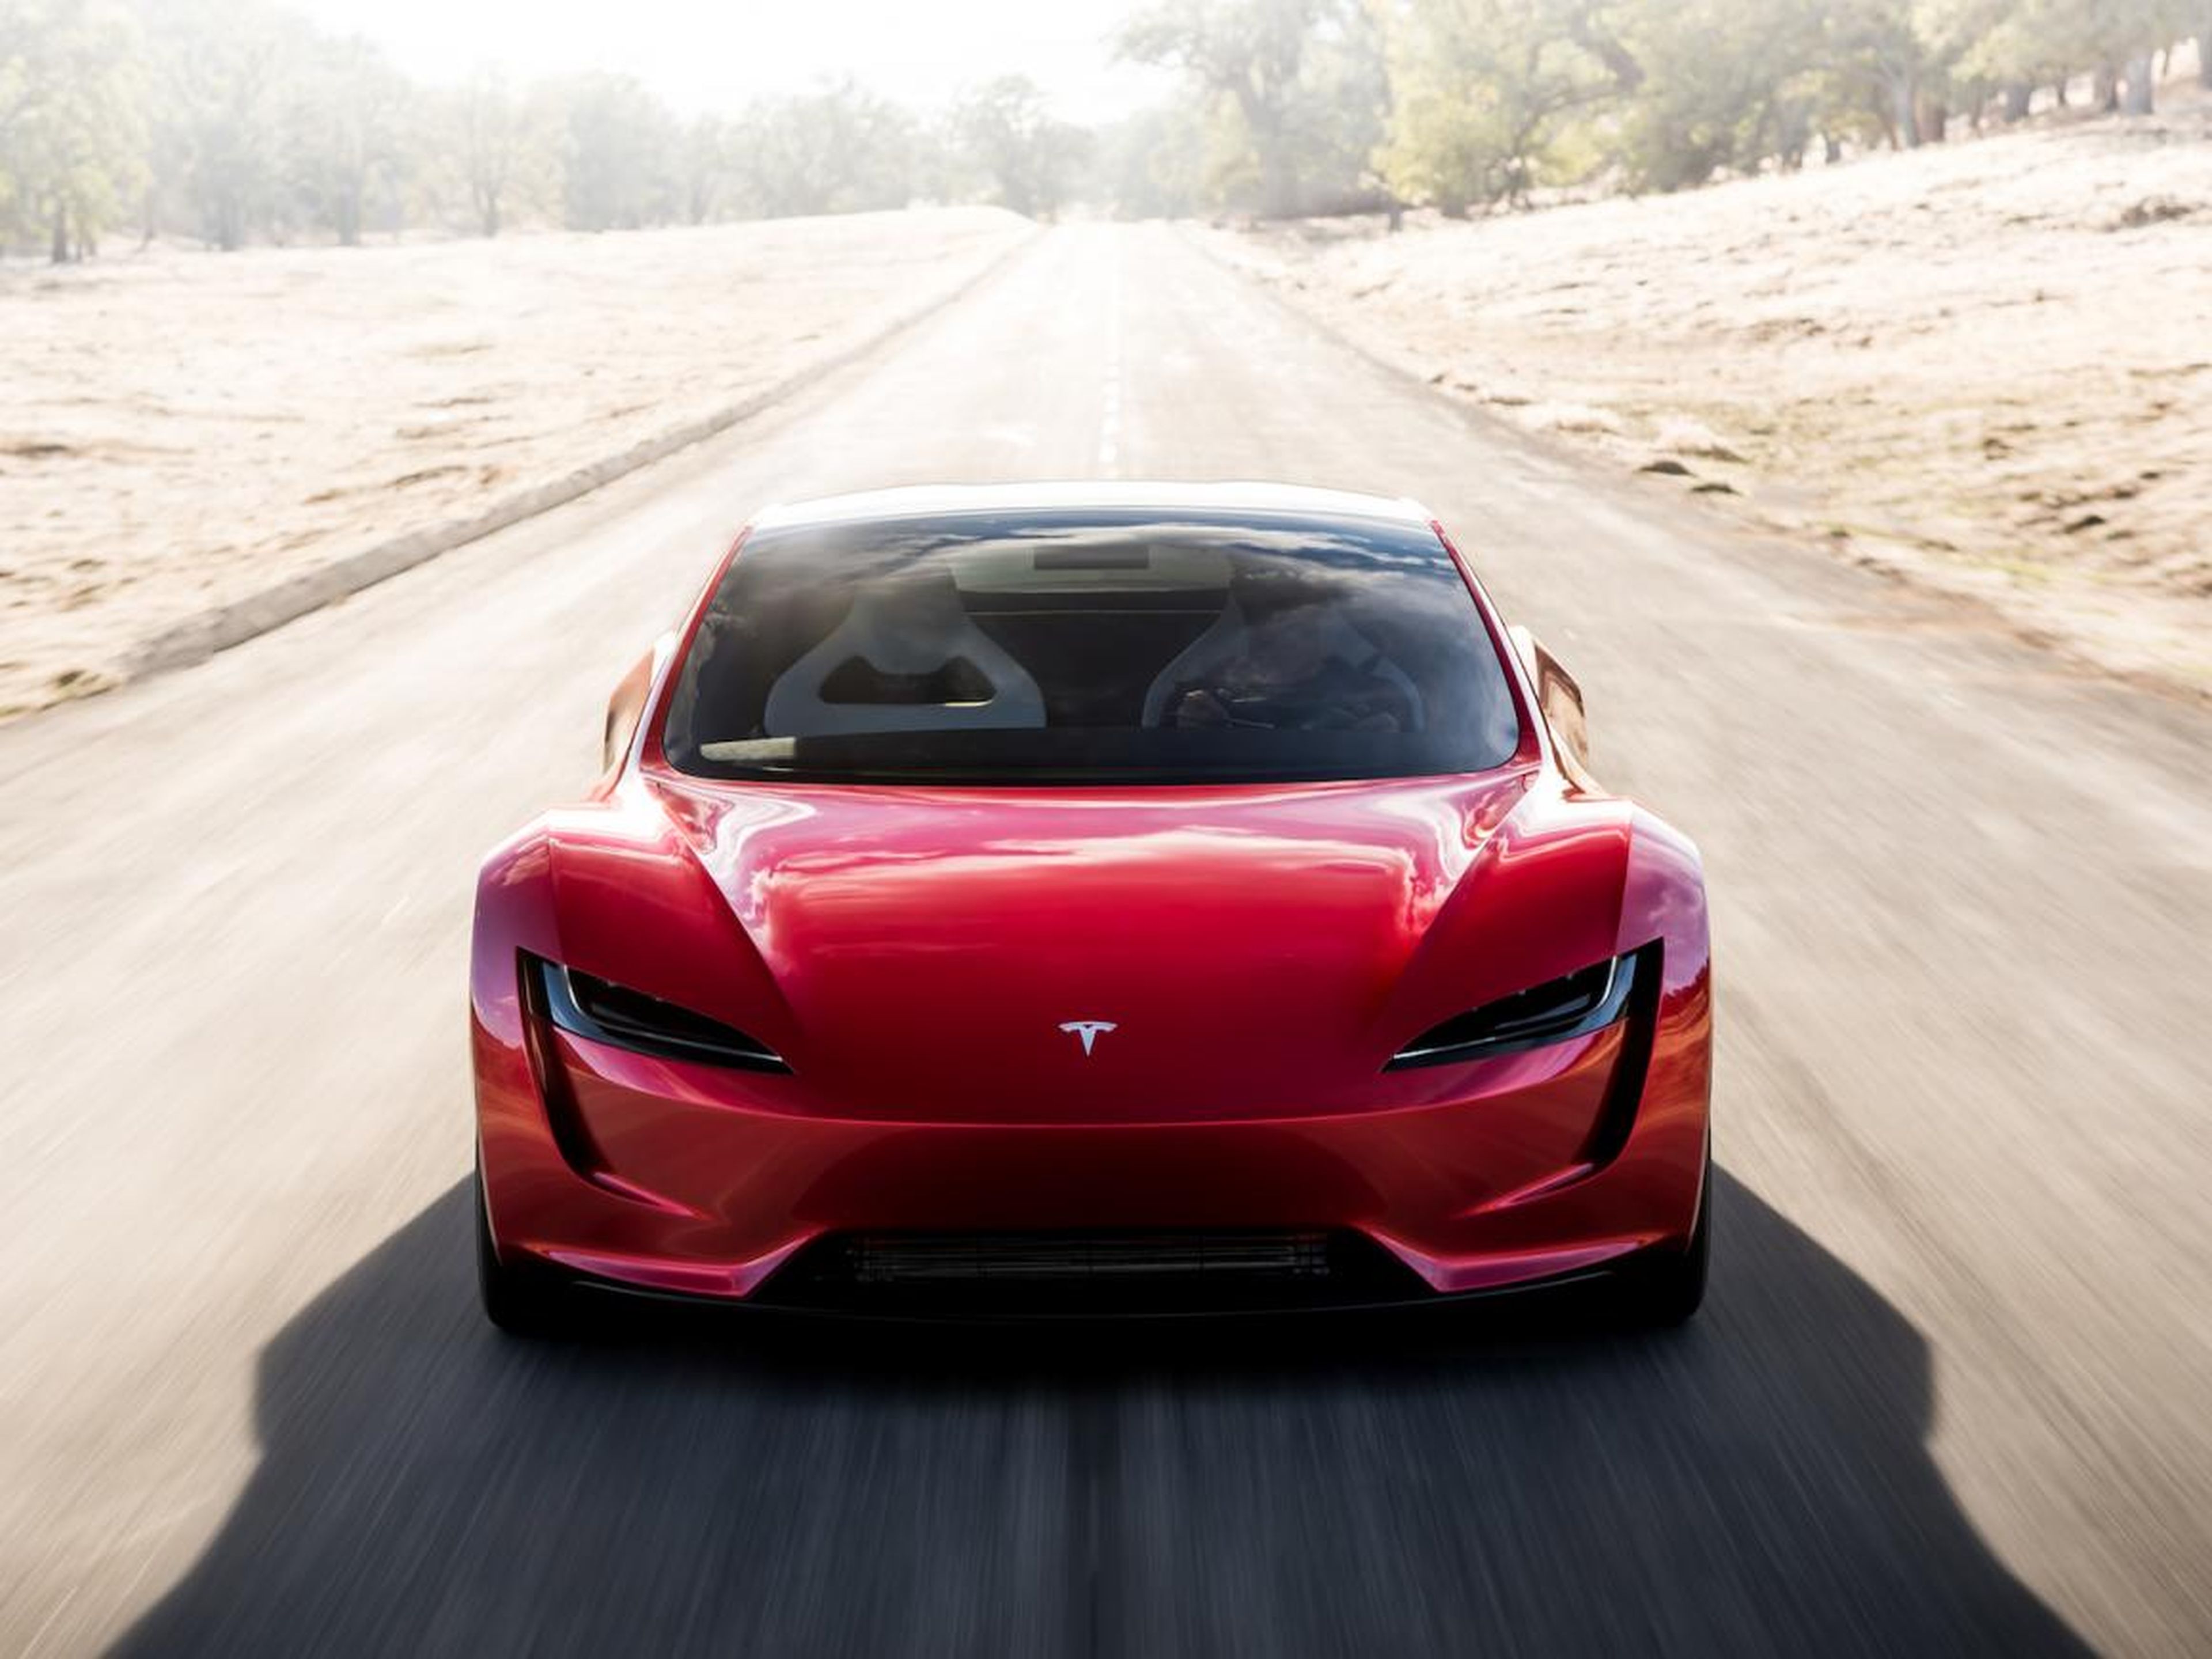 Tesla's new Roadster is expected to arrive in 2020.